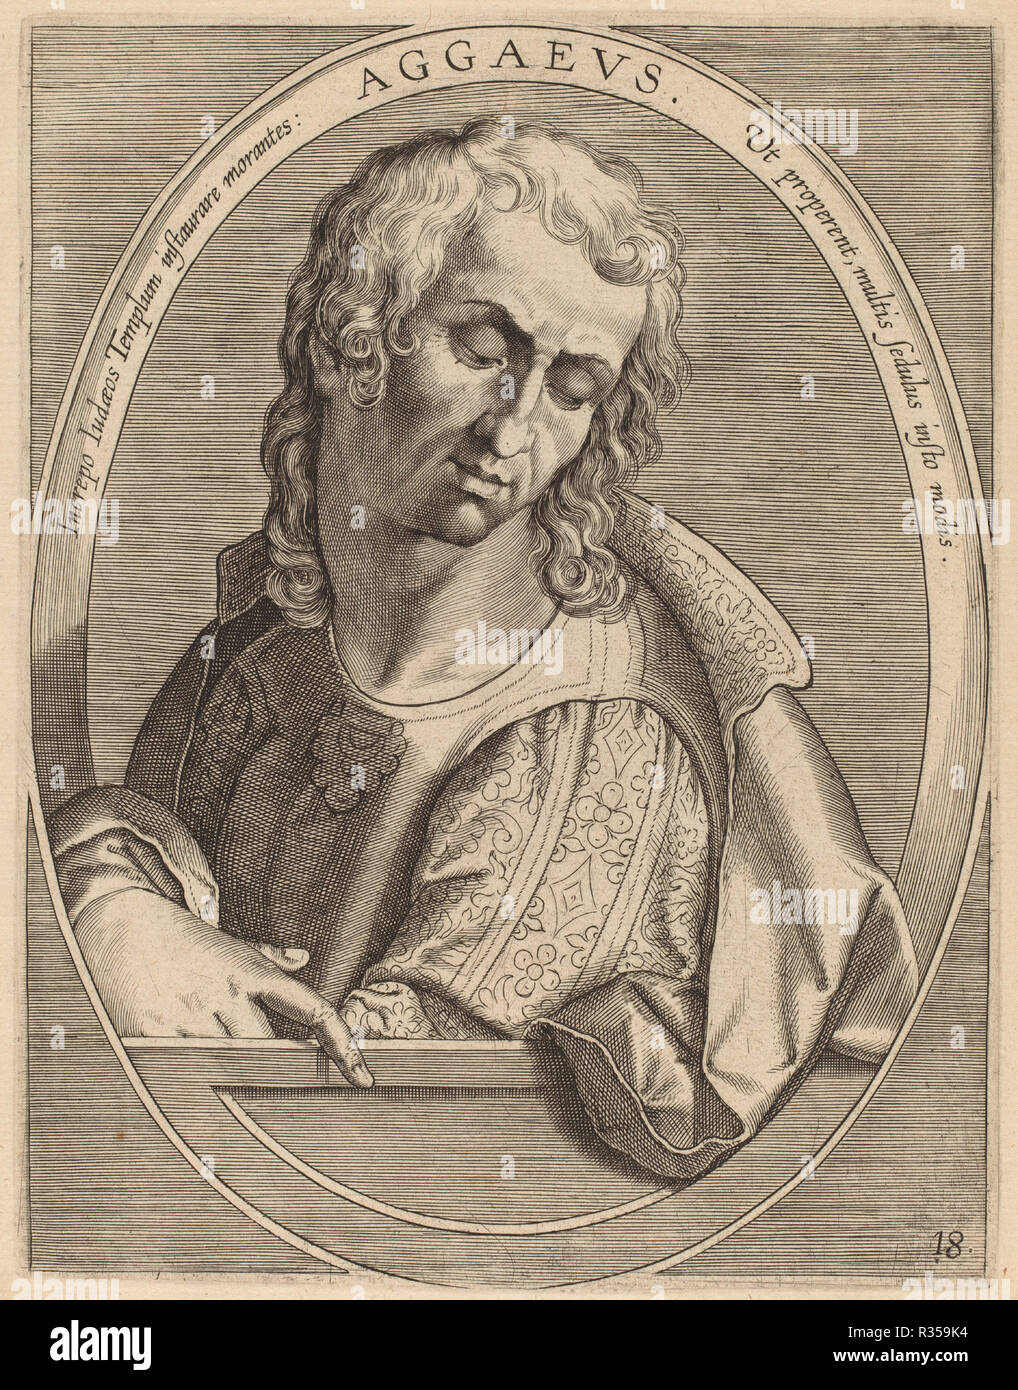 Aggaeus. Dated: published 1613. Dimensions: plate: 17.2 x 13.3 cm (6 3/4 x 5 1/4 in.)  sheet: 24.3 x 19 cm (9 9/16 x 7 1/2 in.). Medium: engraving on laid paper. Museum: National Gallery of Art, Washington DC. Author: Theodor Galle after Jan van der Straet. Stock Photo